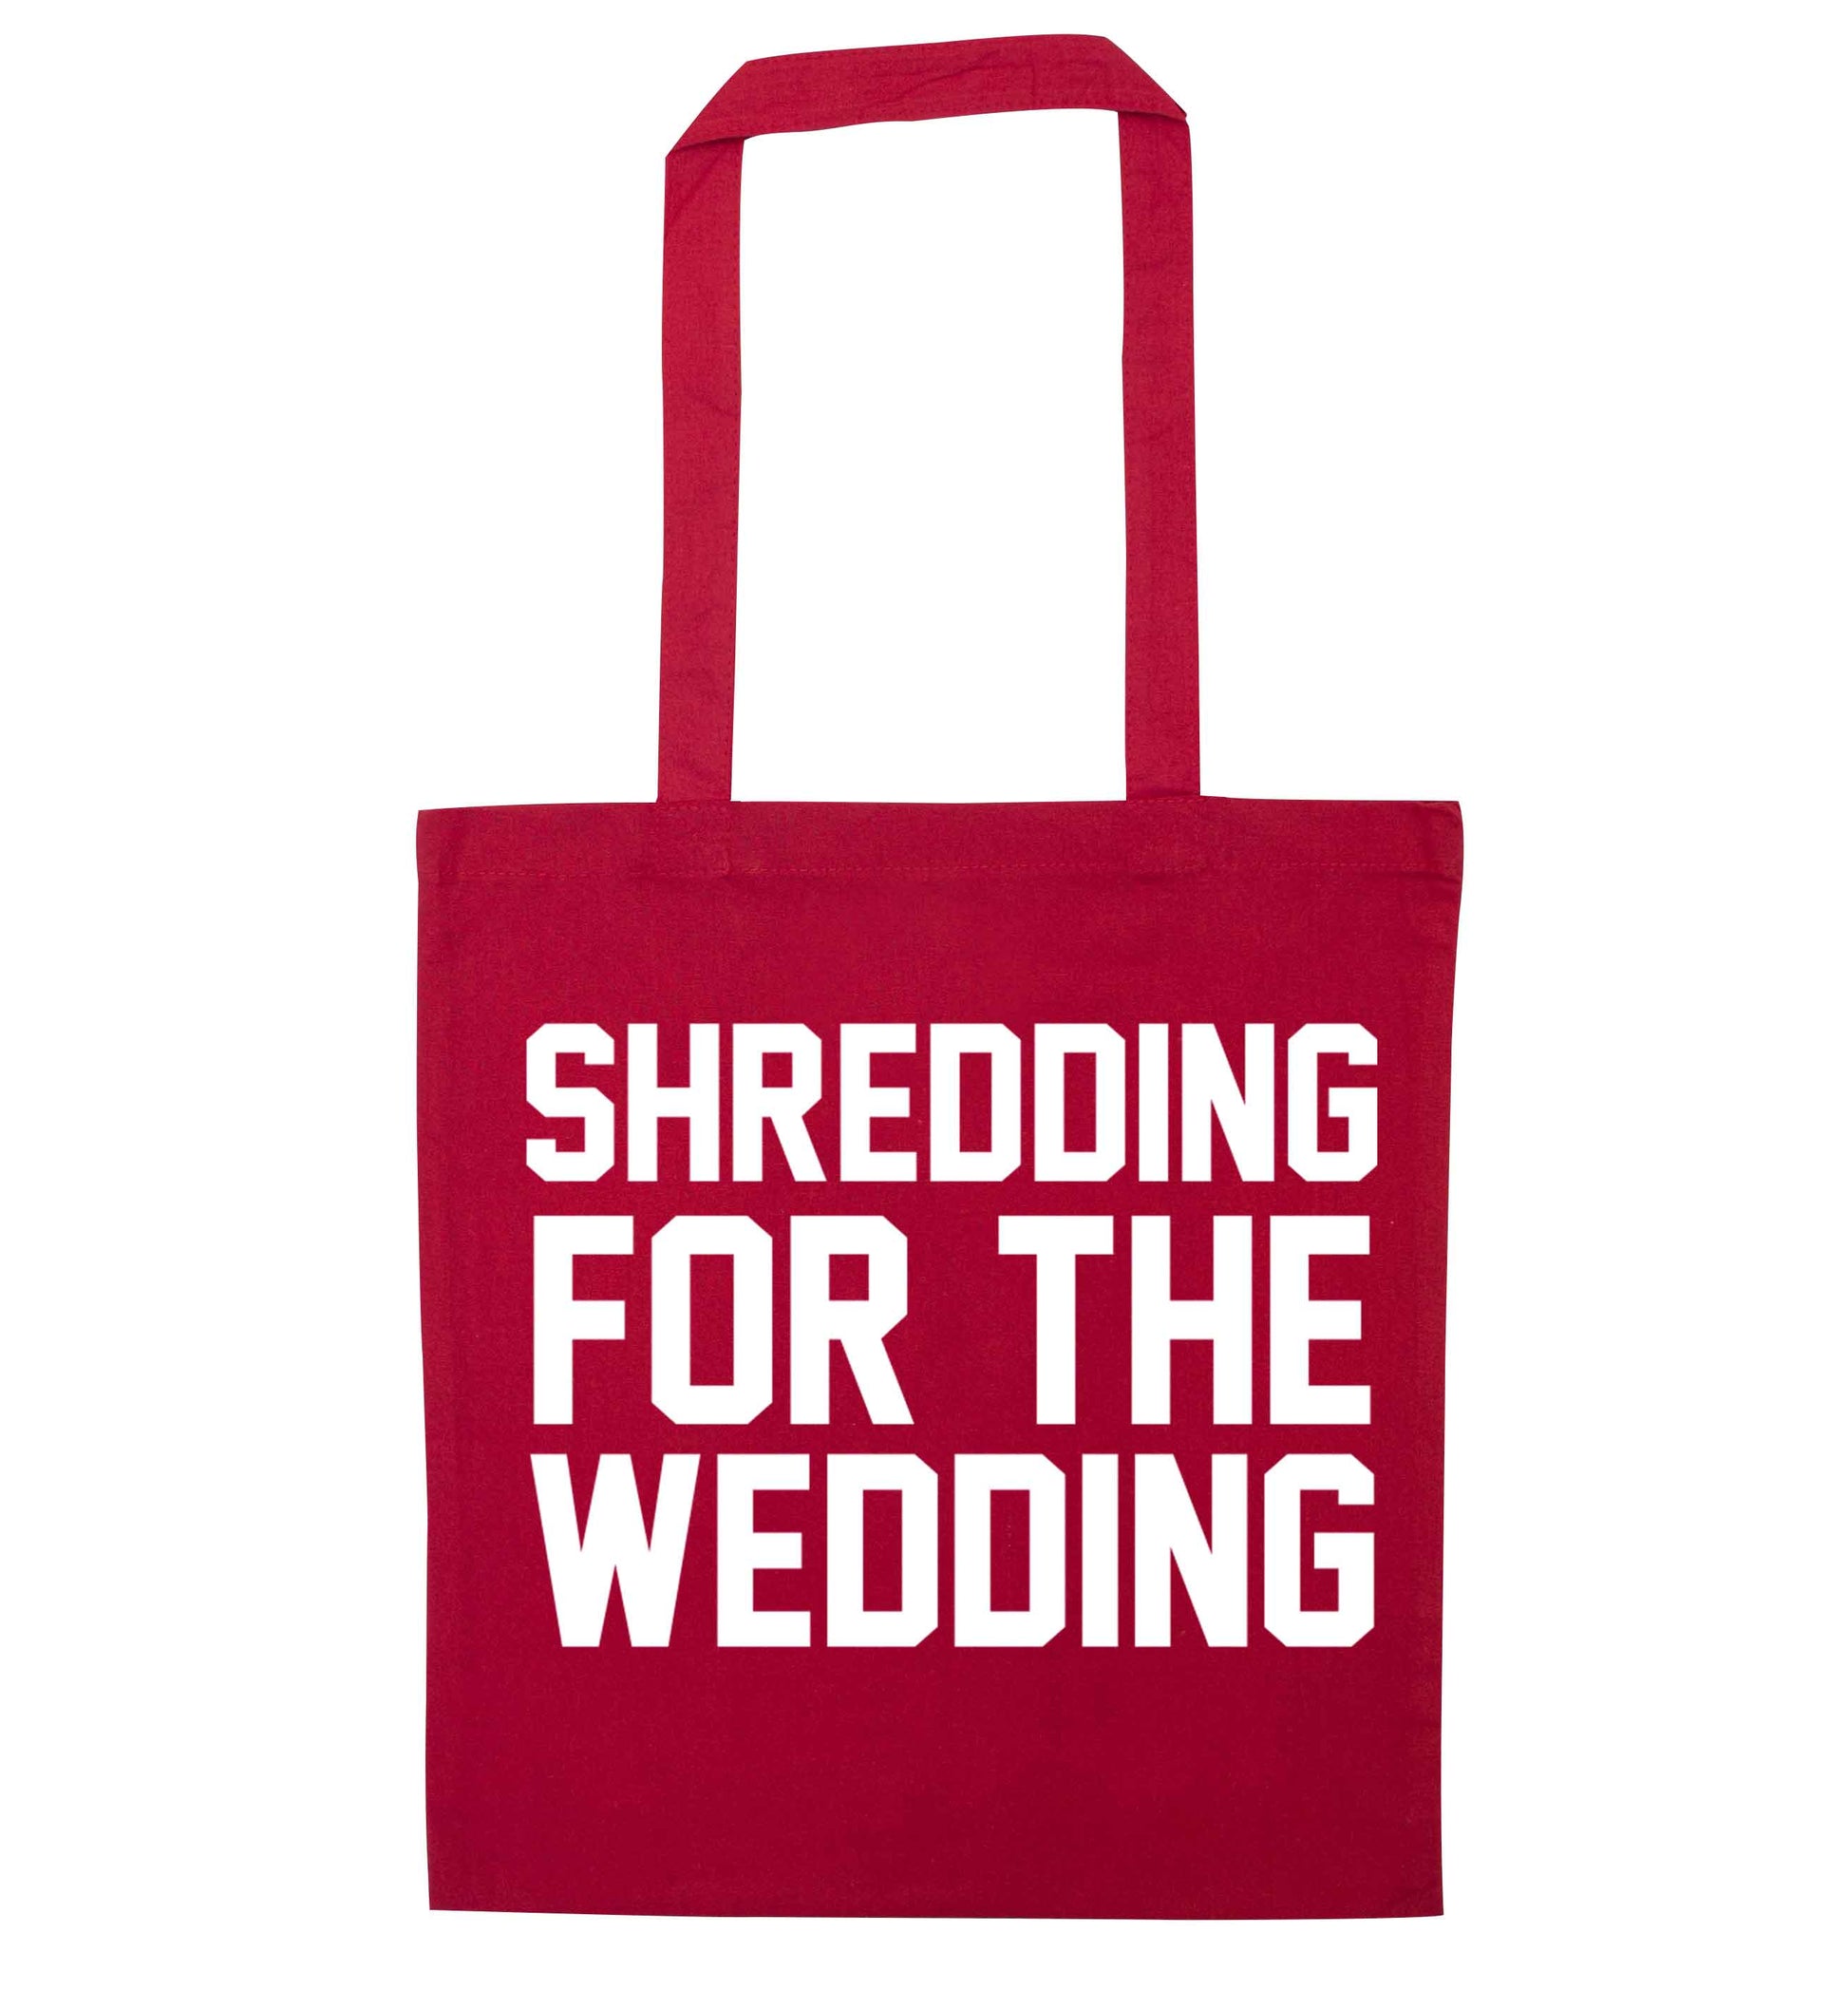 Get motivated and get fit for your big day! Our workout quotes and designs will get you ready to sweat! Perfect for any bride, groom or bridesmaid to be!  red tote bag